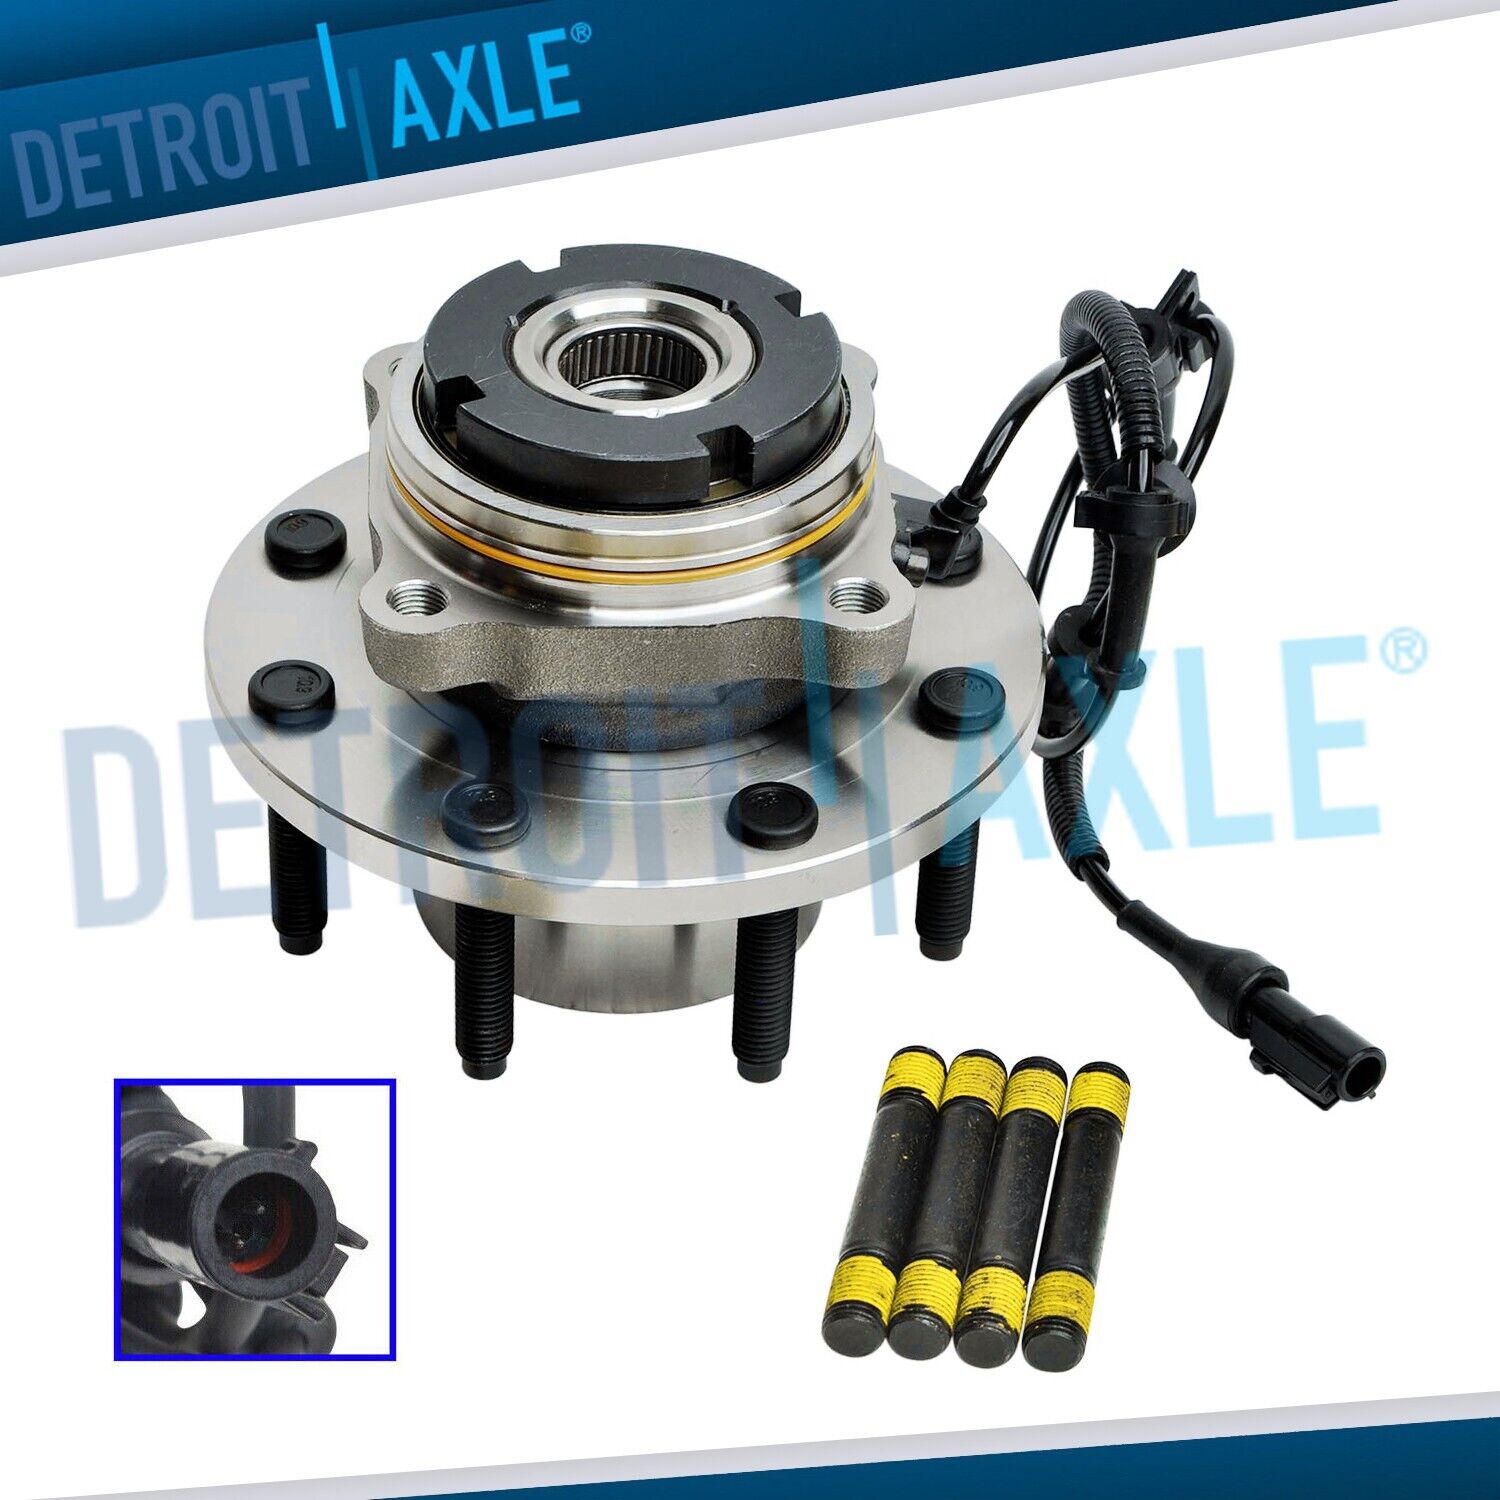 4WD Front Wheel Bearing Hub for 1999-2002 Ford F-250 F-350 SD Excursion SRW ABS